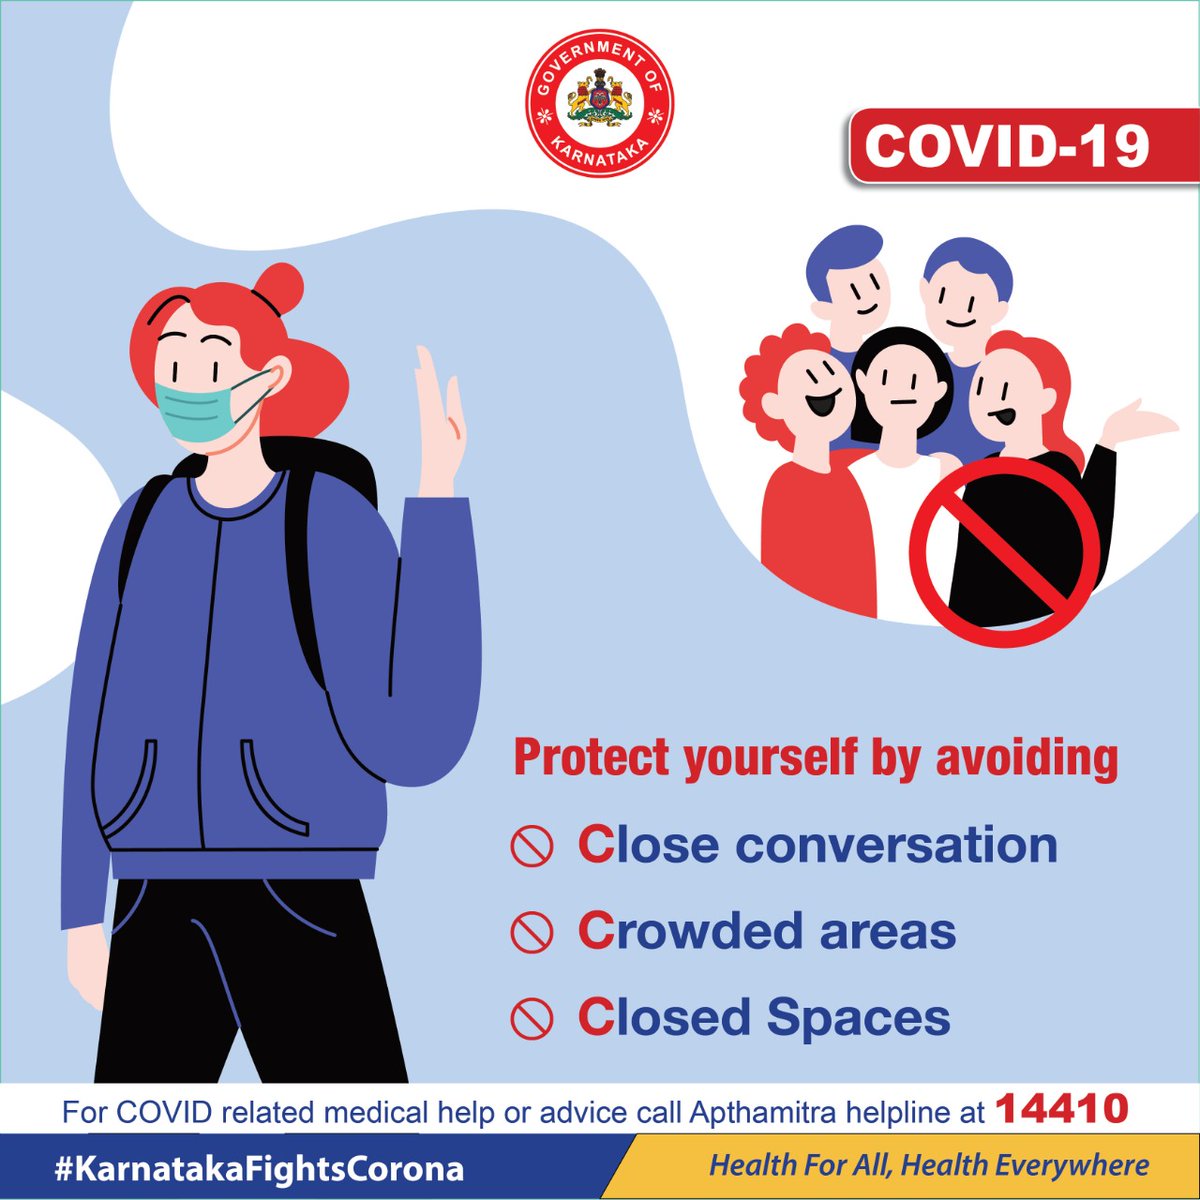 Corona can be fatal. Until a cure is found, mask is your vaccine. Use mask at all times. Maintain social distancing & sanitize your hands. #KarnatakaFightsCorona